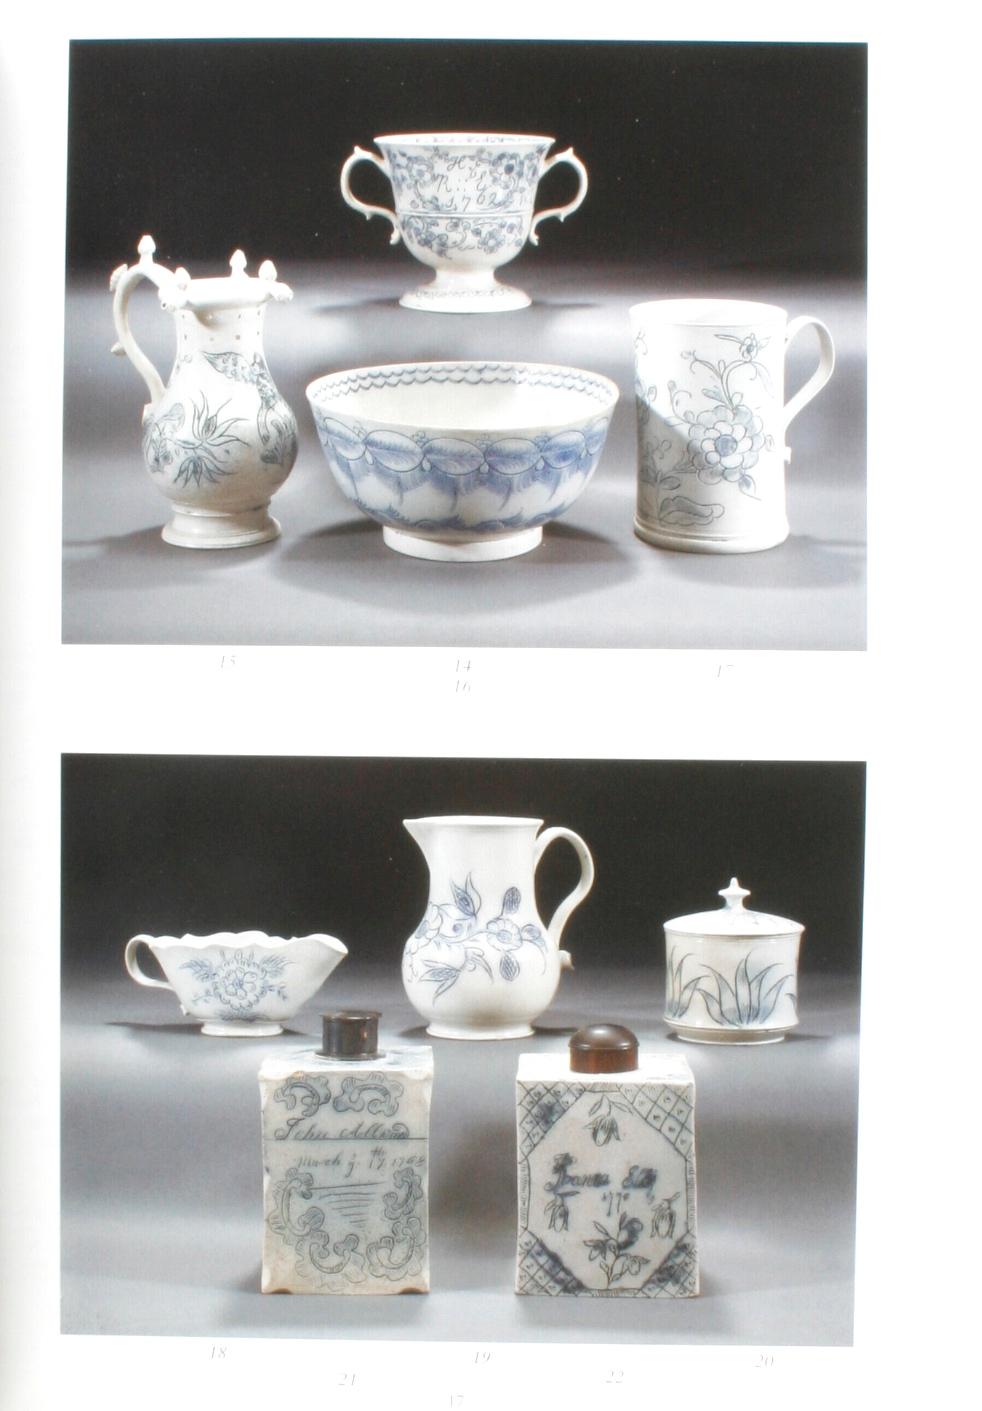 Property from the Estate of Marie Creem, October 1996. Softcover auction catalog with 245 lots including: English ceramics, silver, brass, needlework, early American furniture, and more. With results.
NPT Books a division of N.P. Trent Antiques has